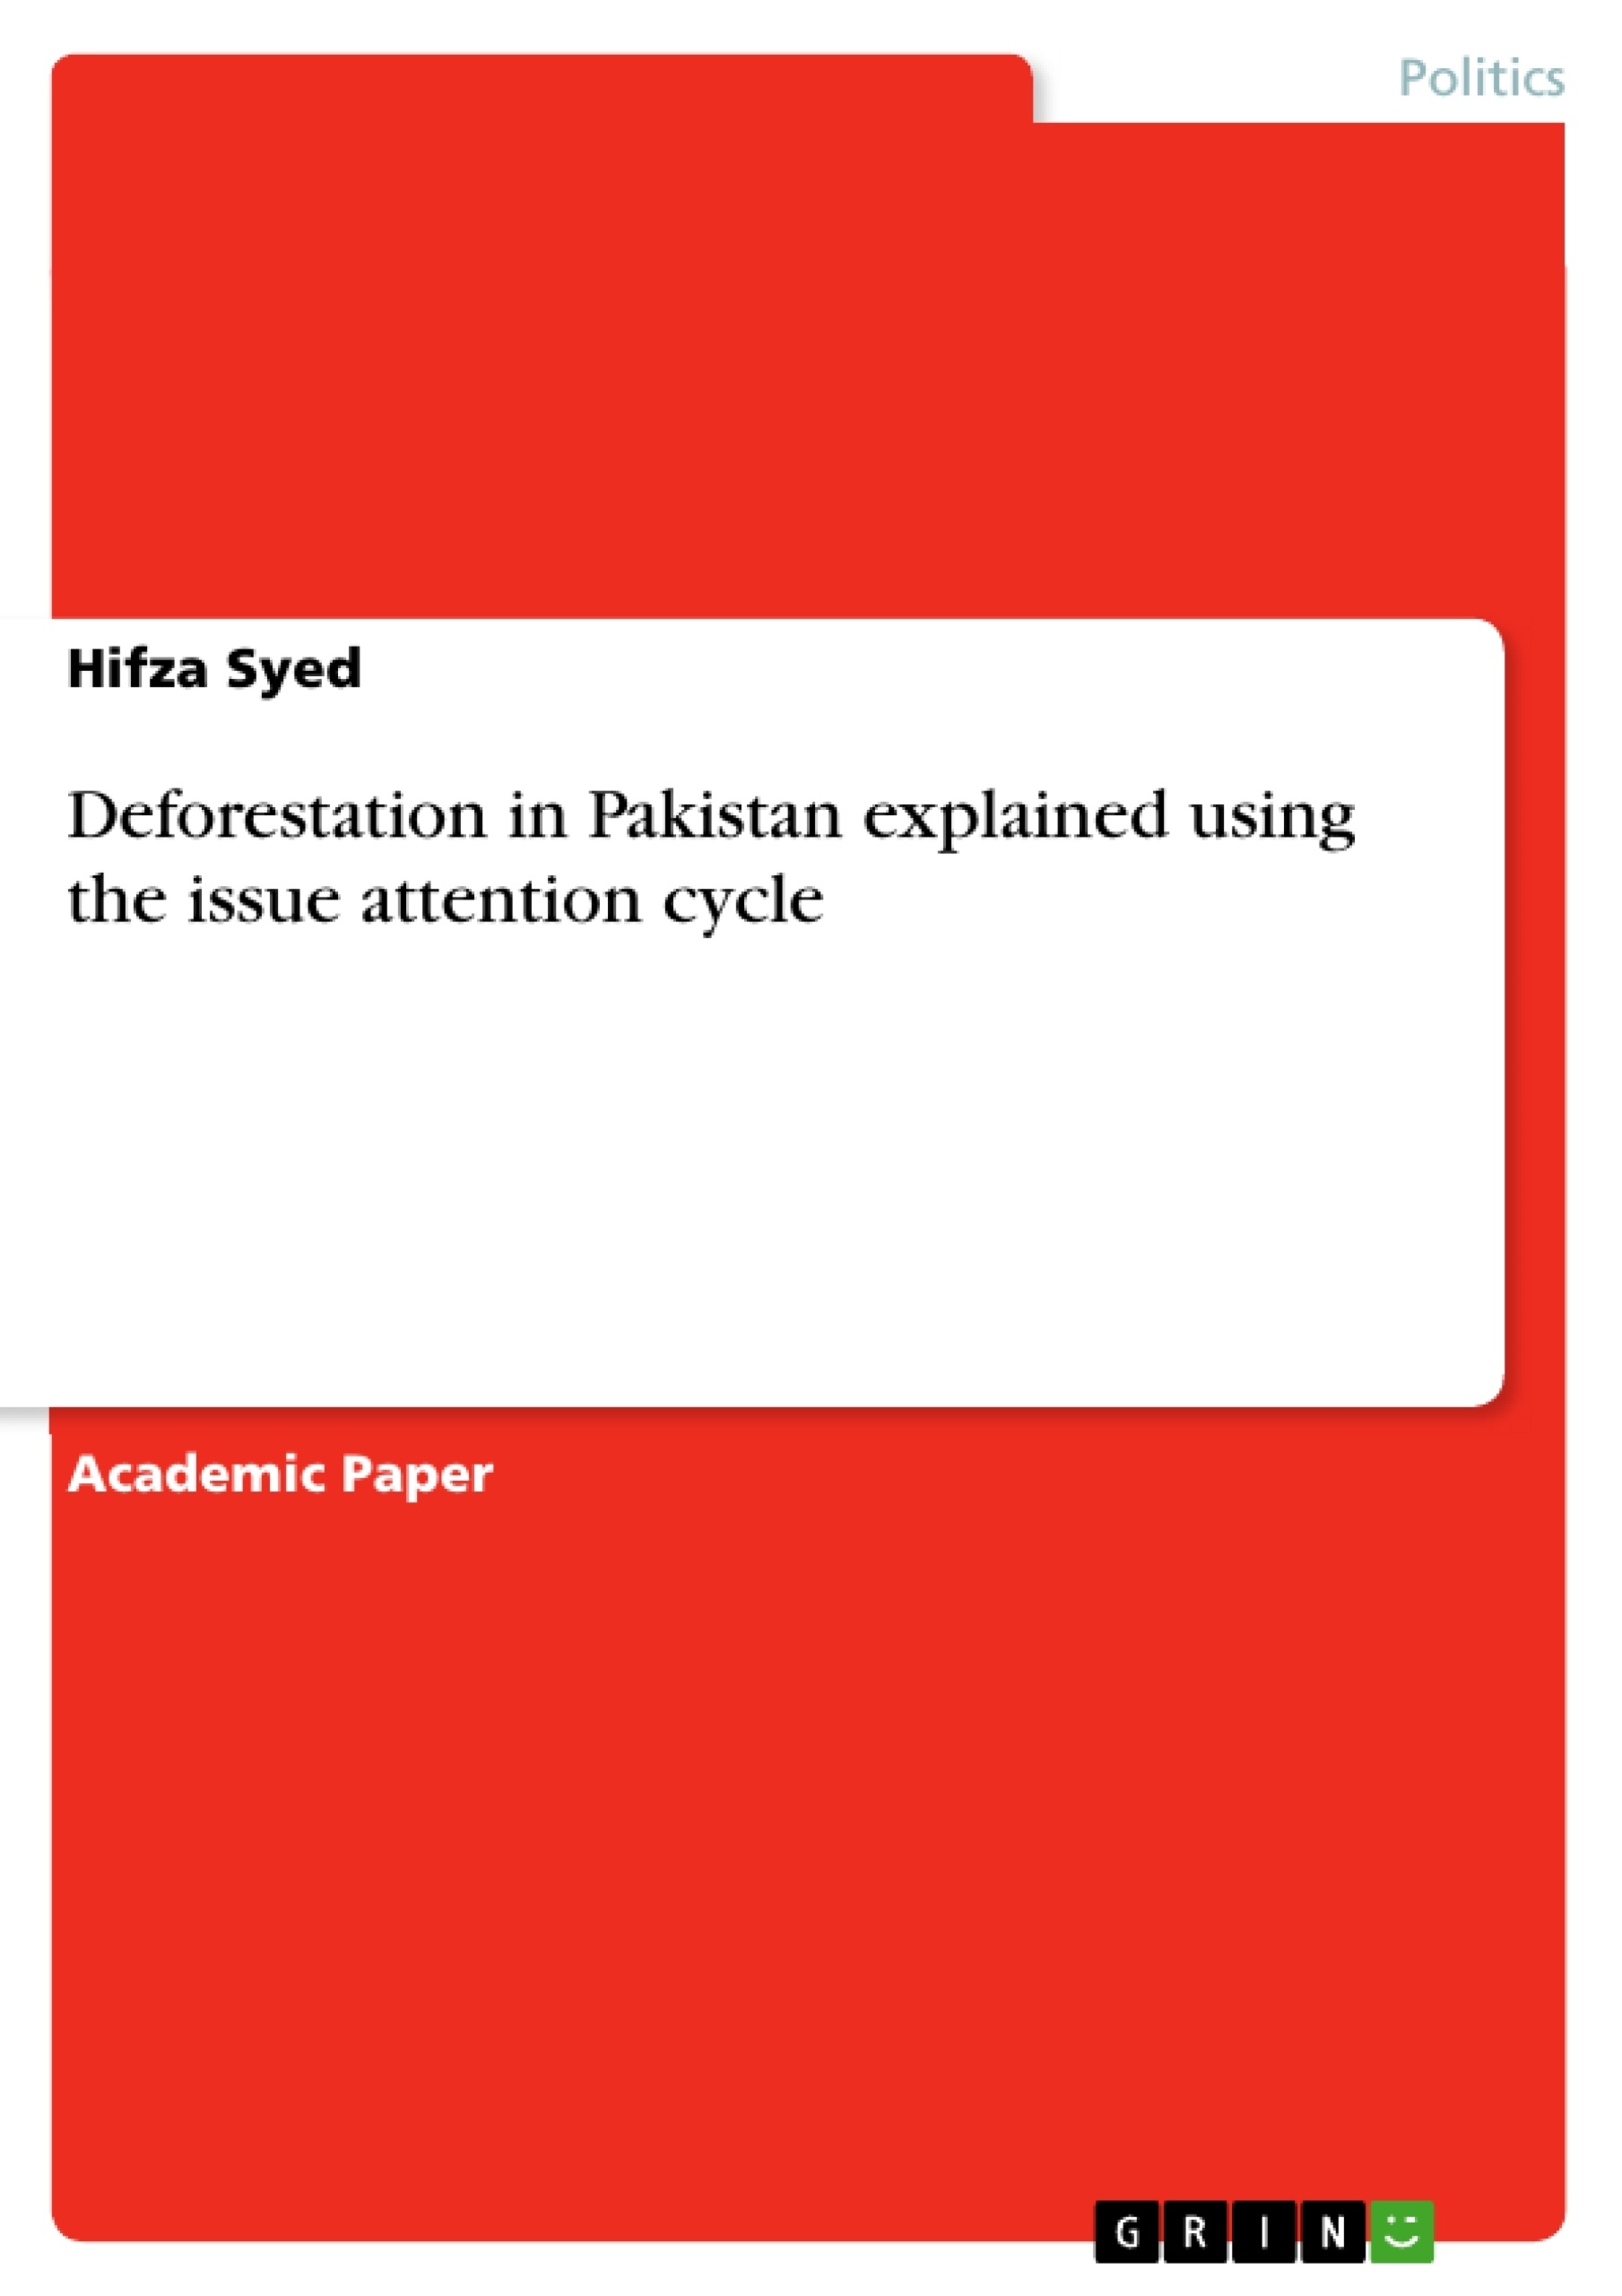 Titel: Deforestation in Pakistan explained using the issue attention cycle